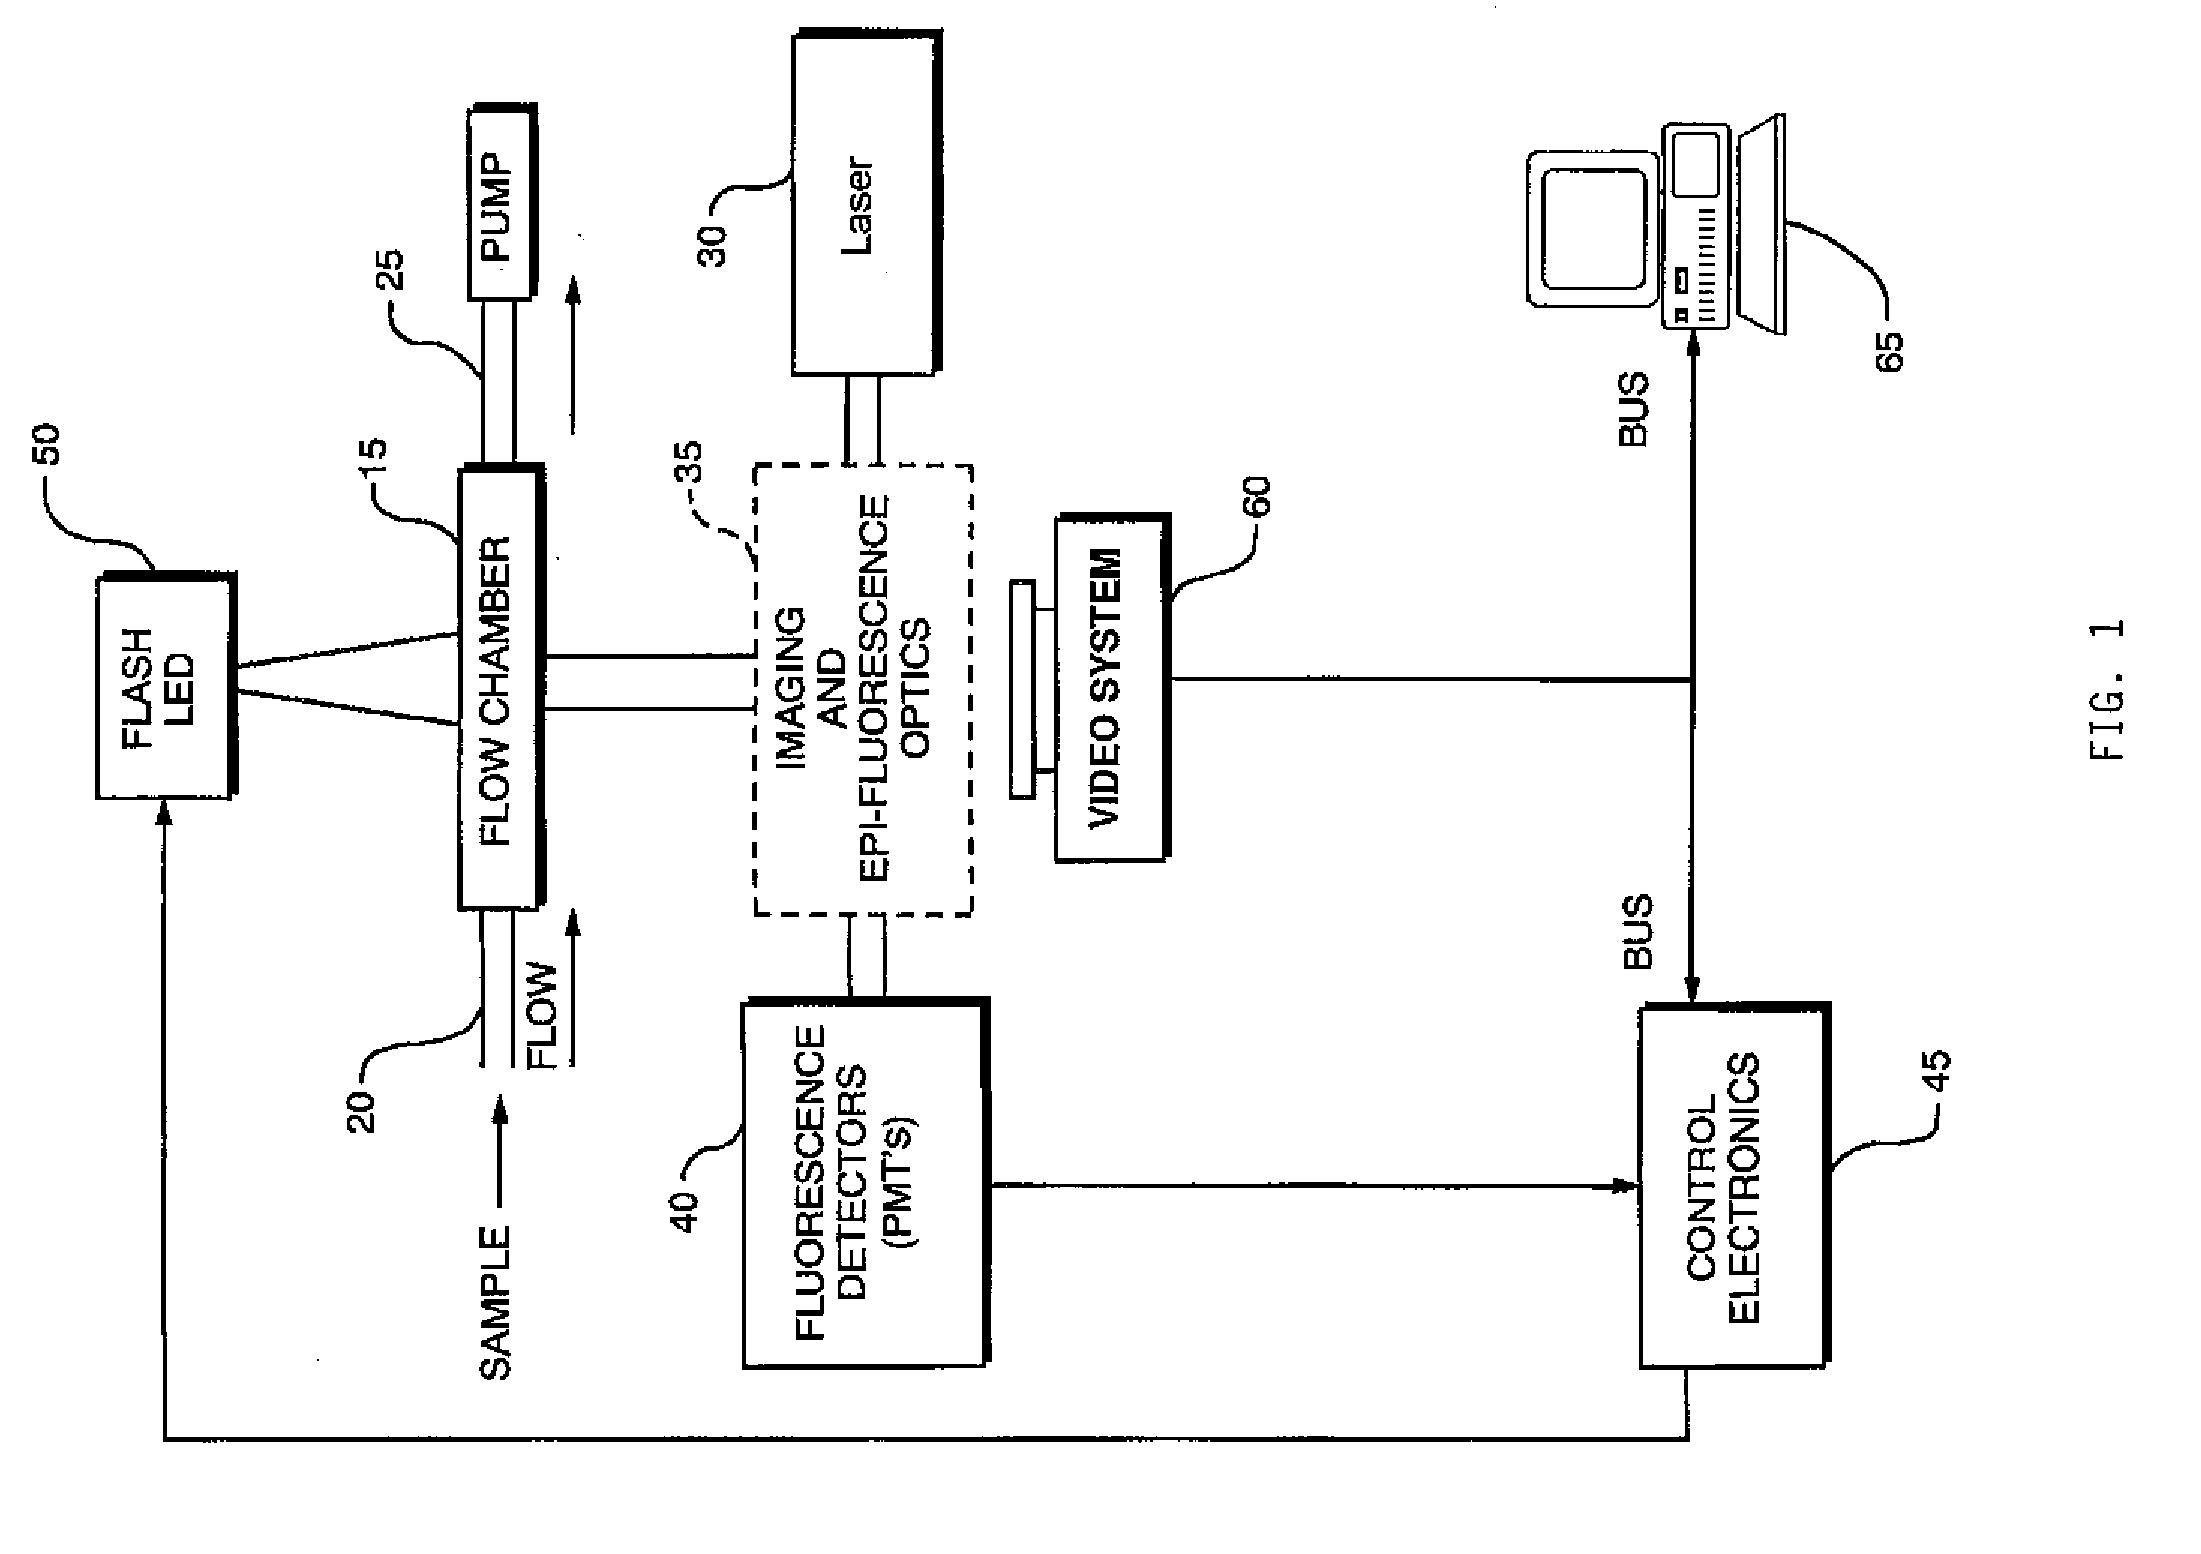 System and method for monitoring blue-green algae in a fluid